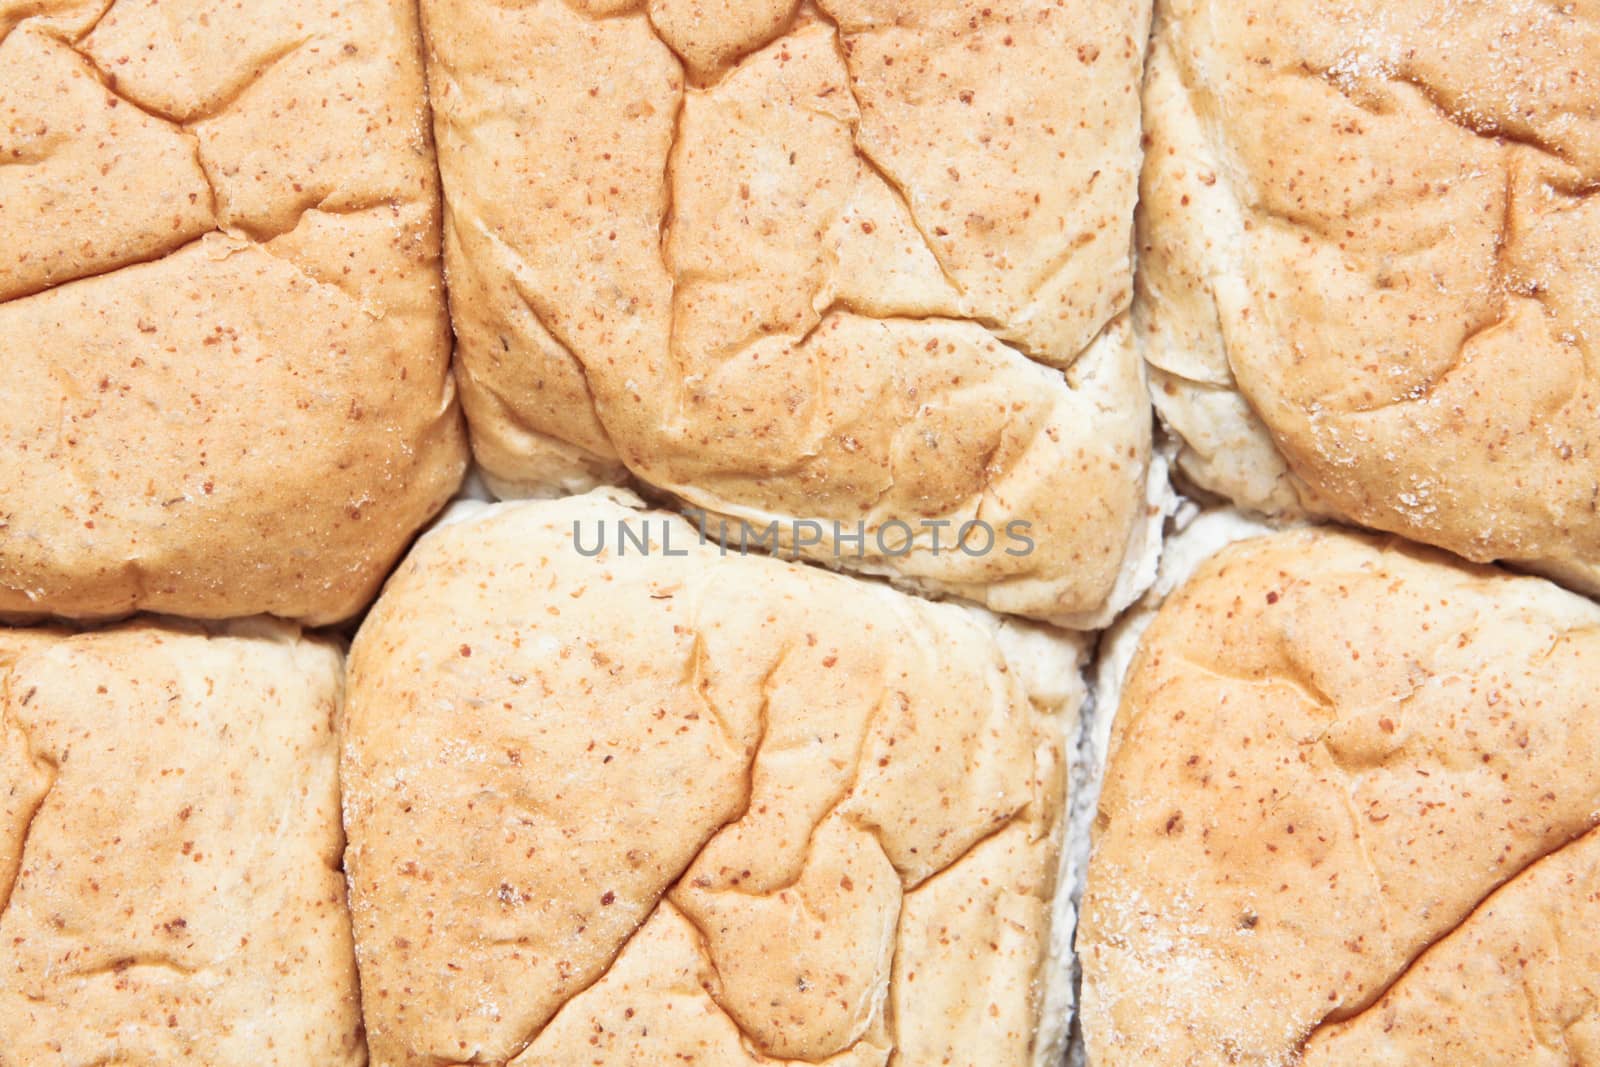 Six bread rolls as a background image